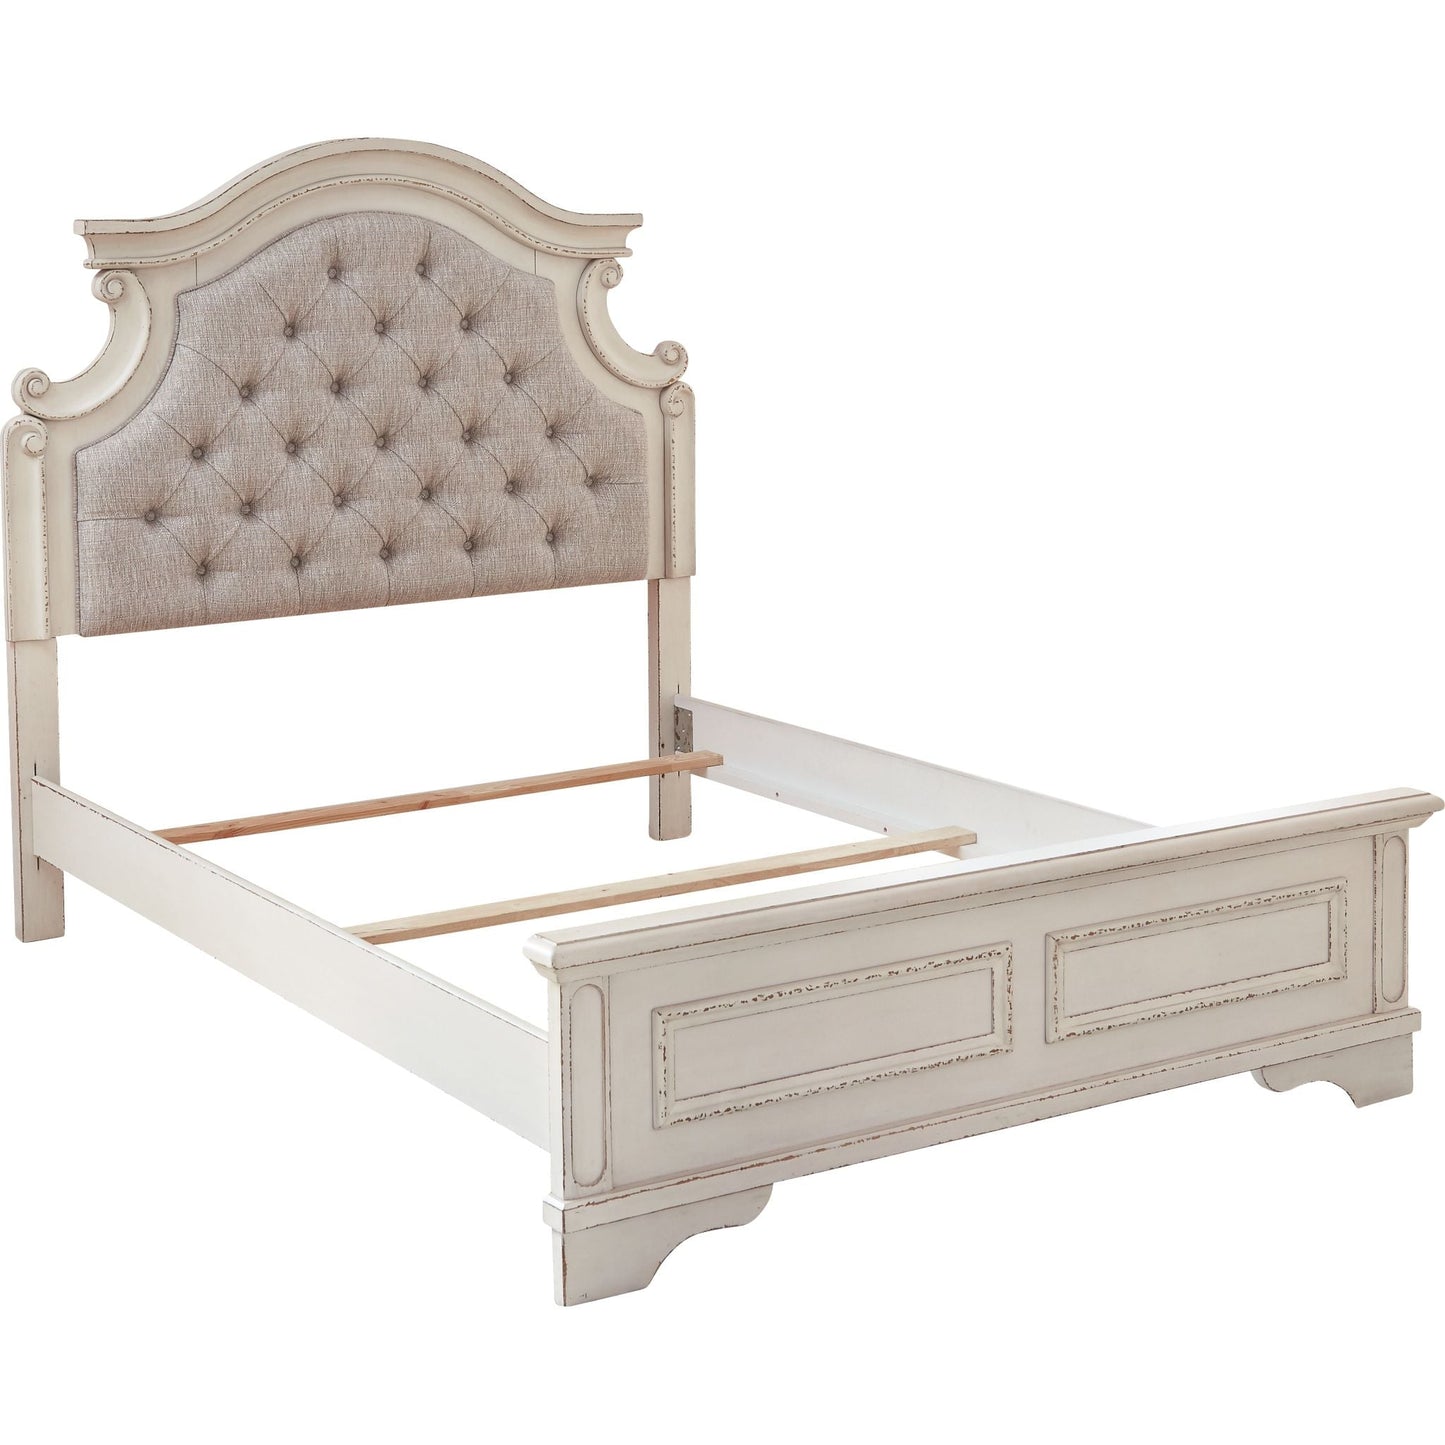 Realyn 3 Piece Full Bed - Chipped White